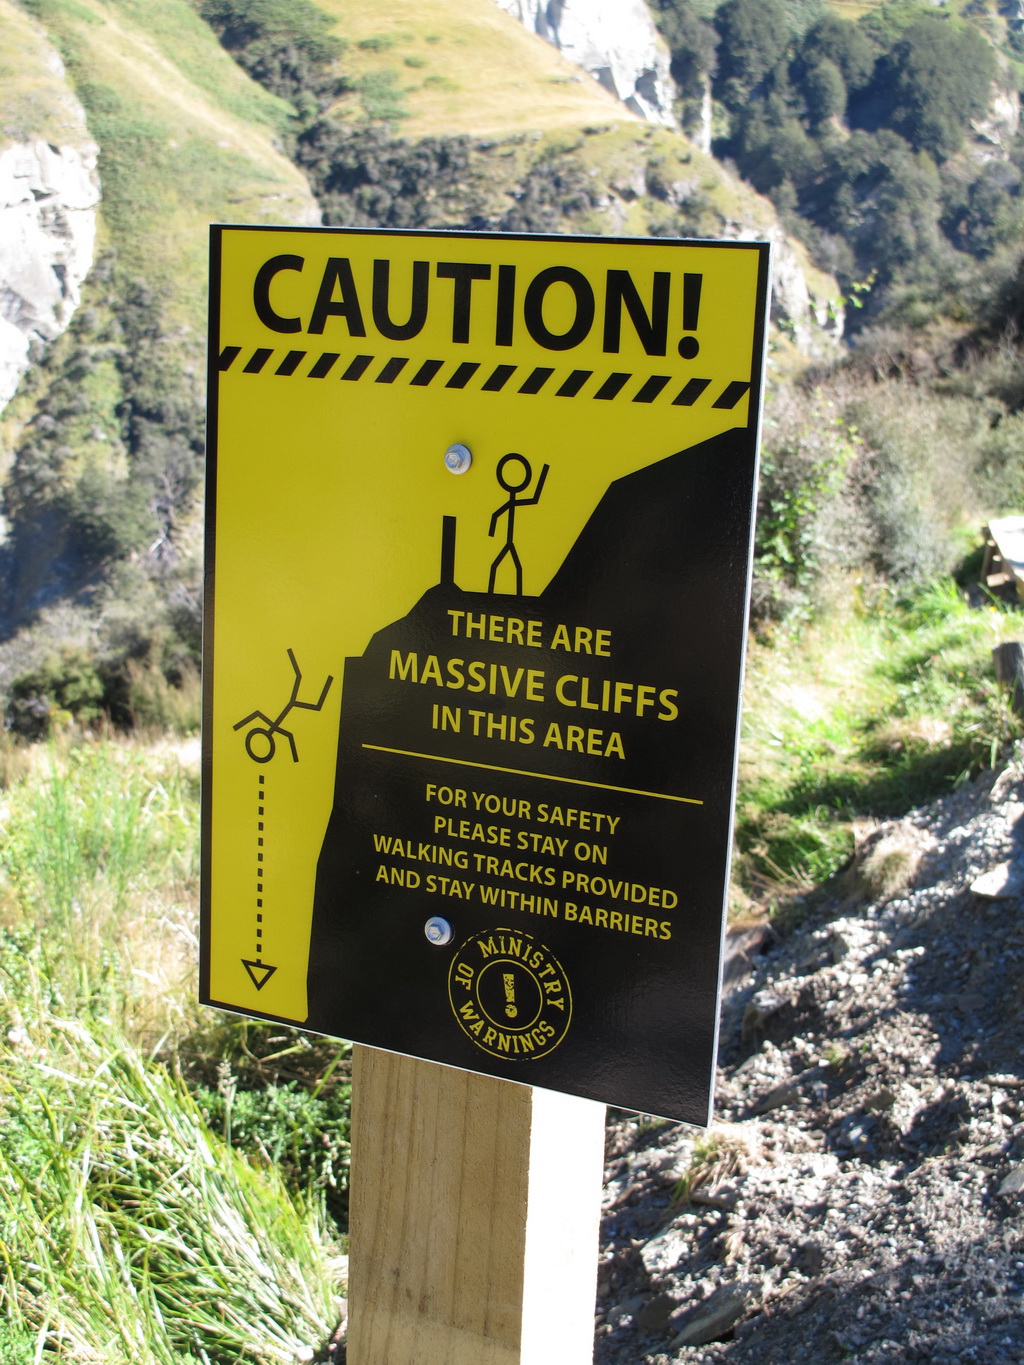 "Caution! There are massive cliffs in this area"